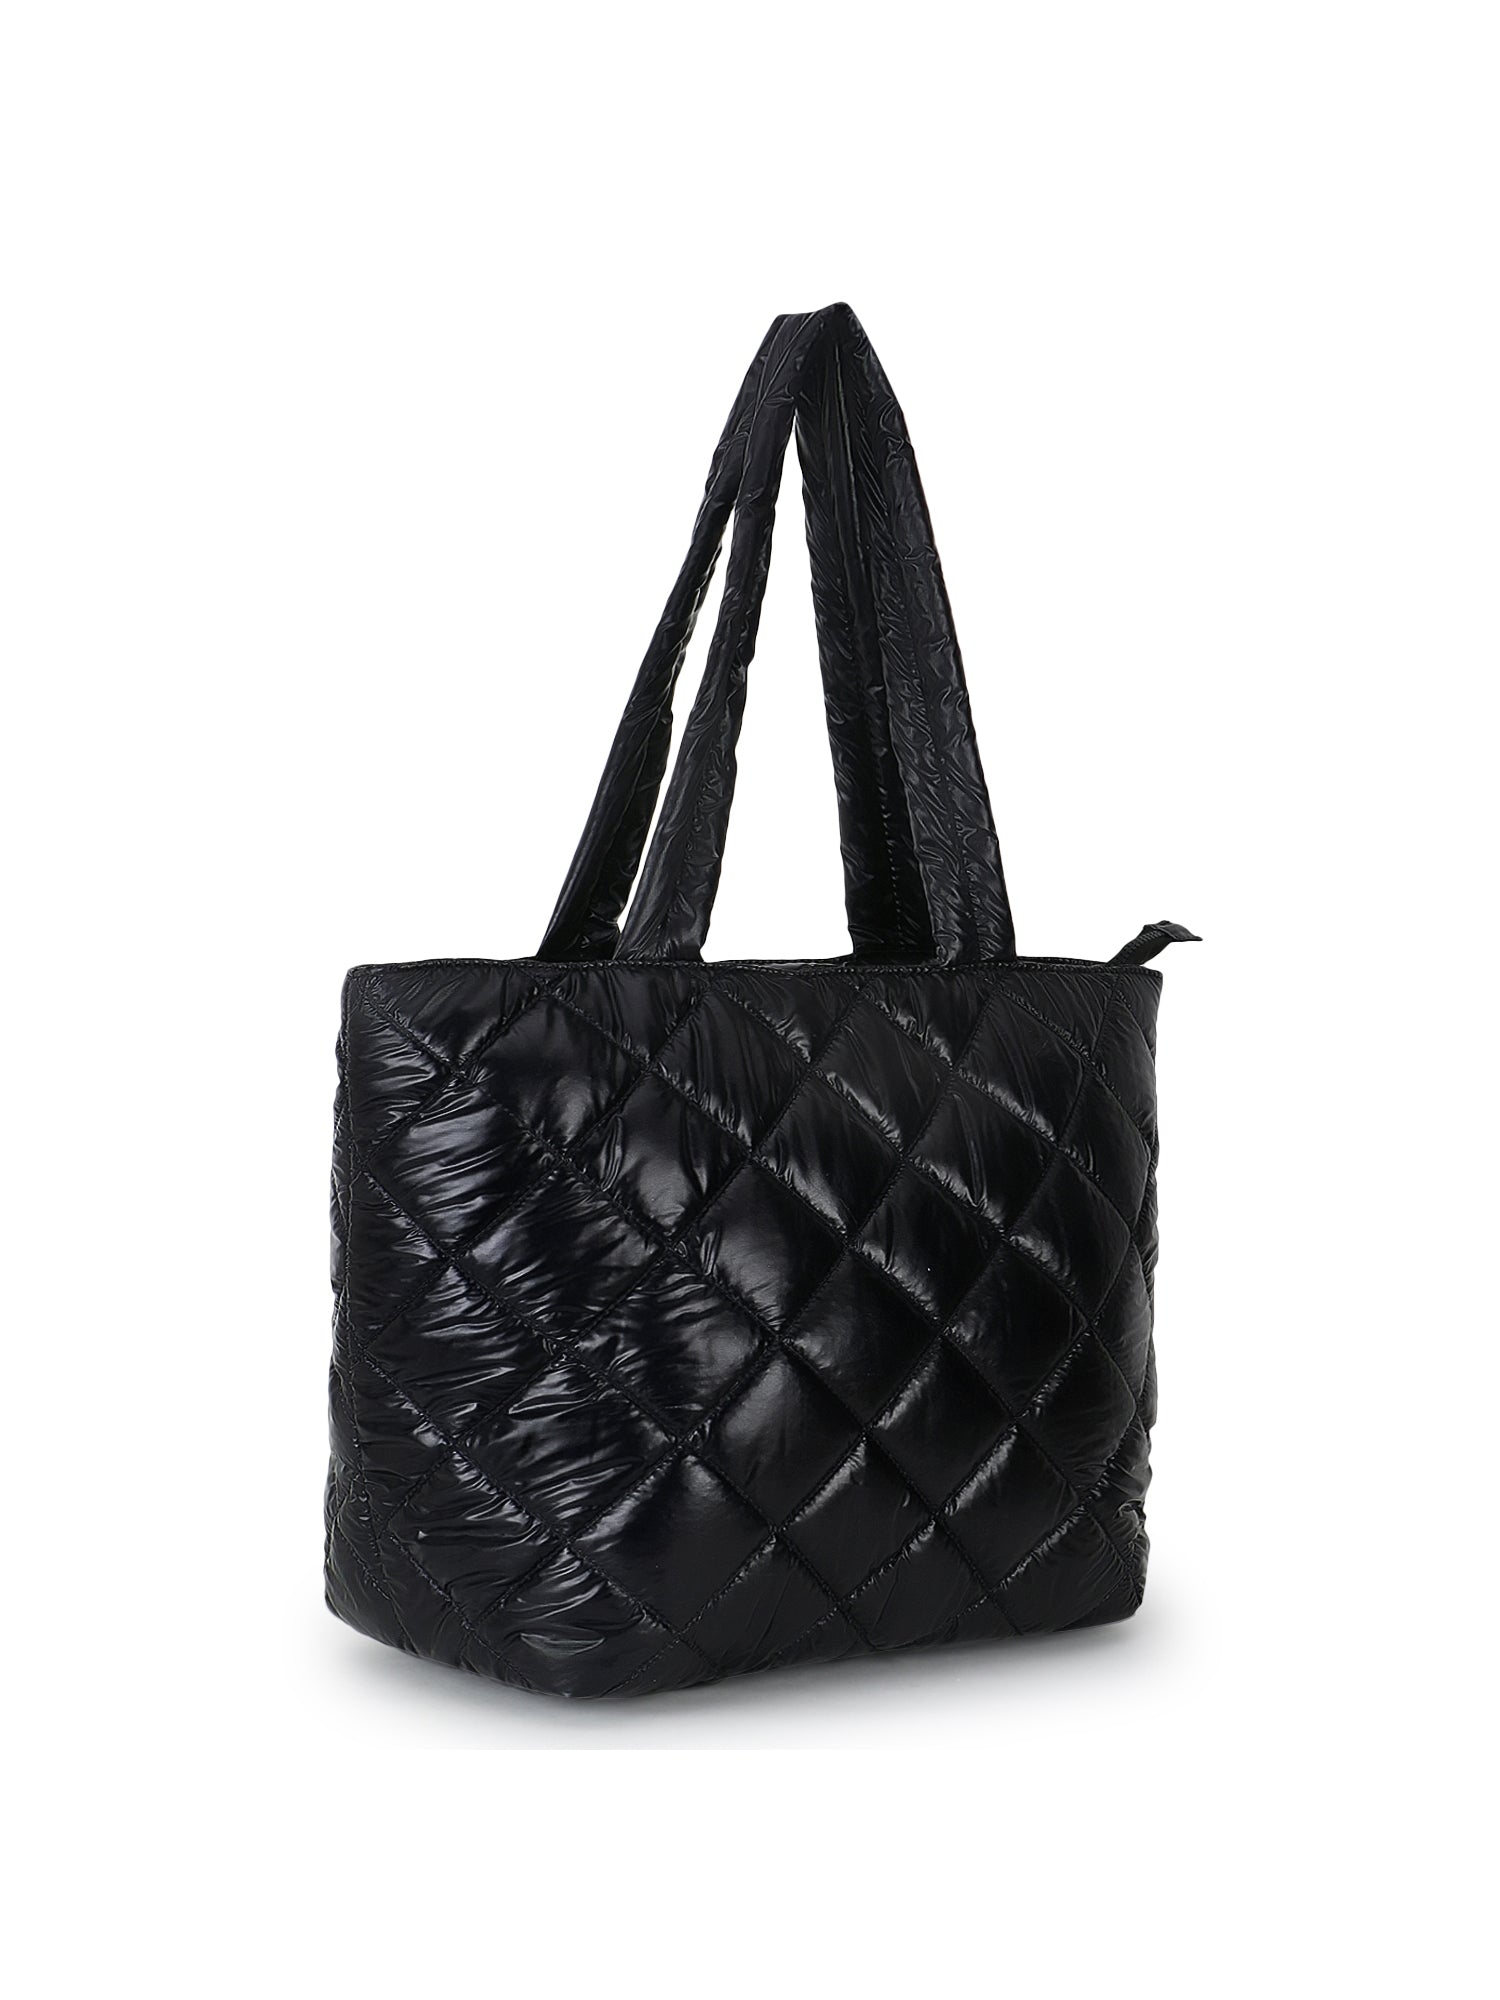 Uno Quilted Polyester Diamond Self Design Handheld Bag